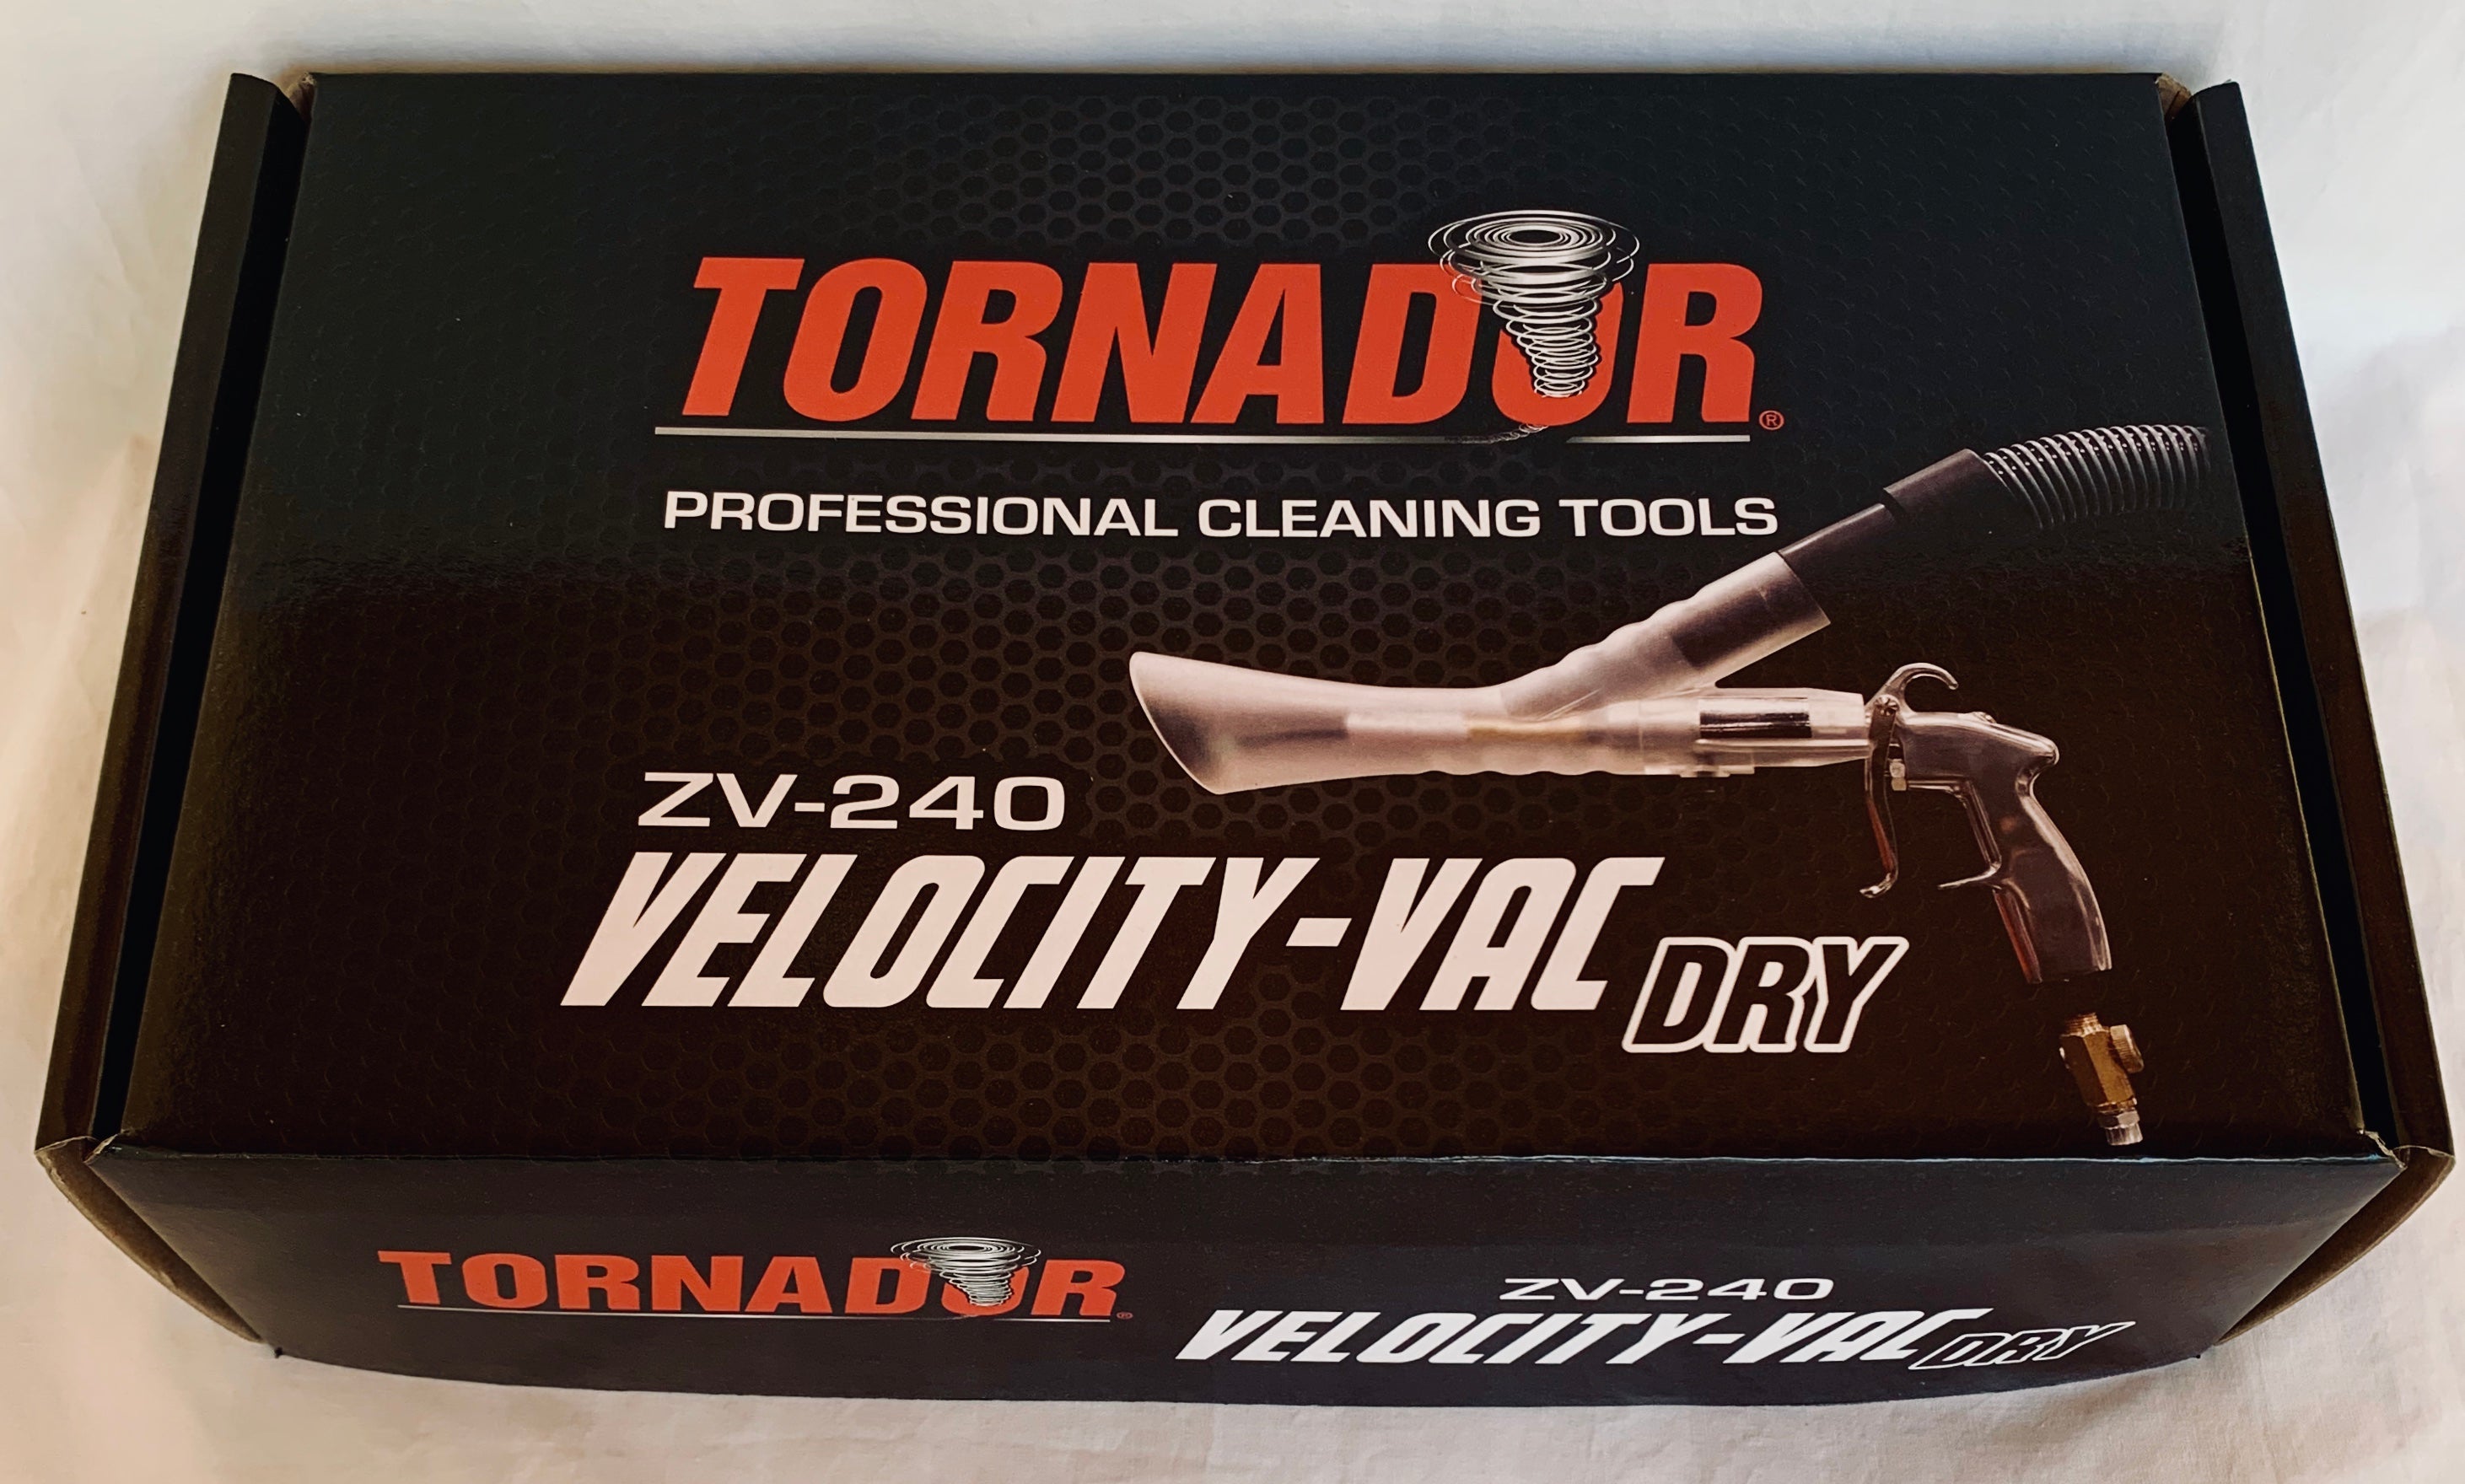 TORNADOR ZV-240 VELOCITY-VAC DRY - Majestic Solutions Auto Detail Products